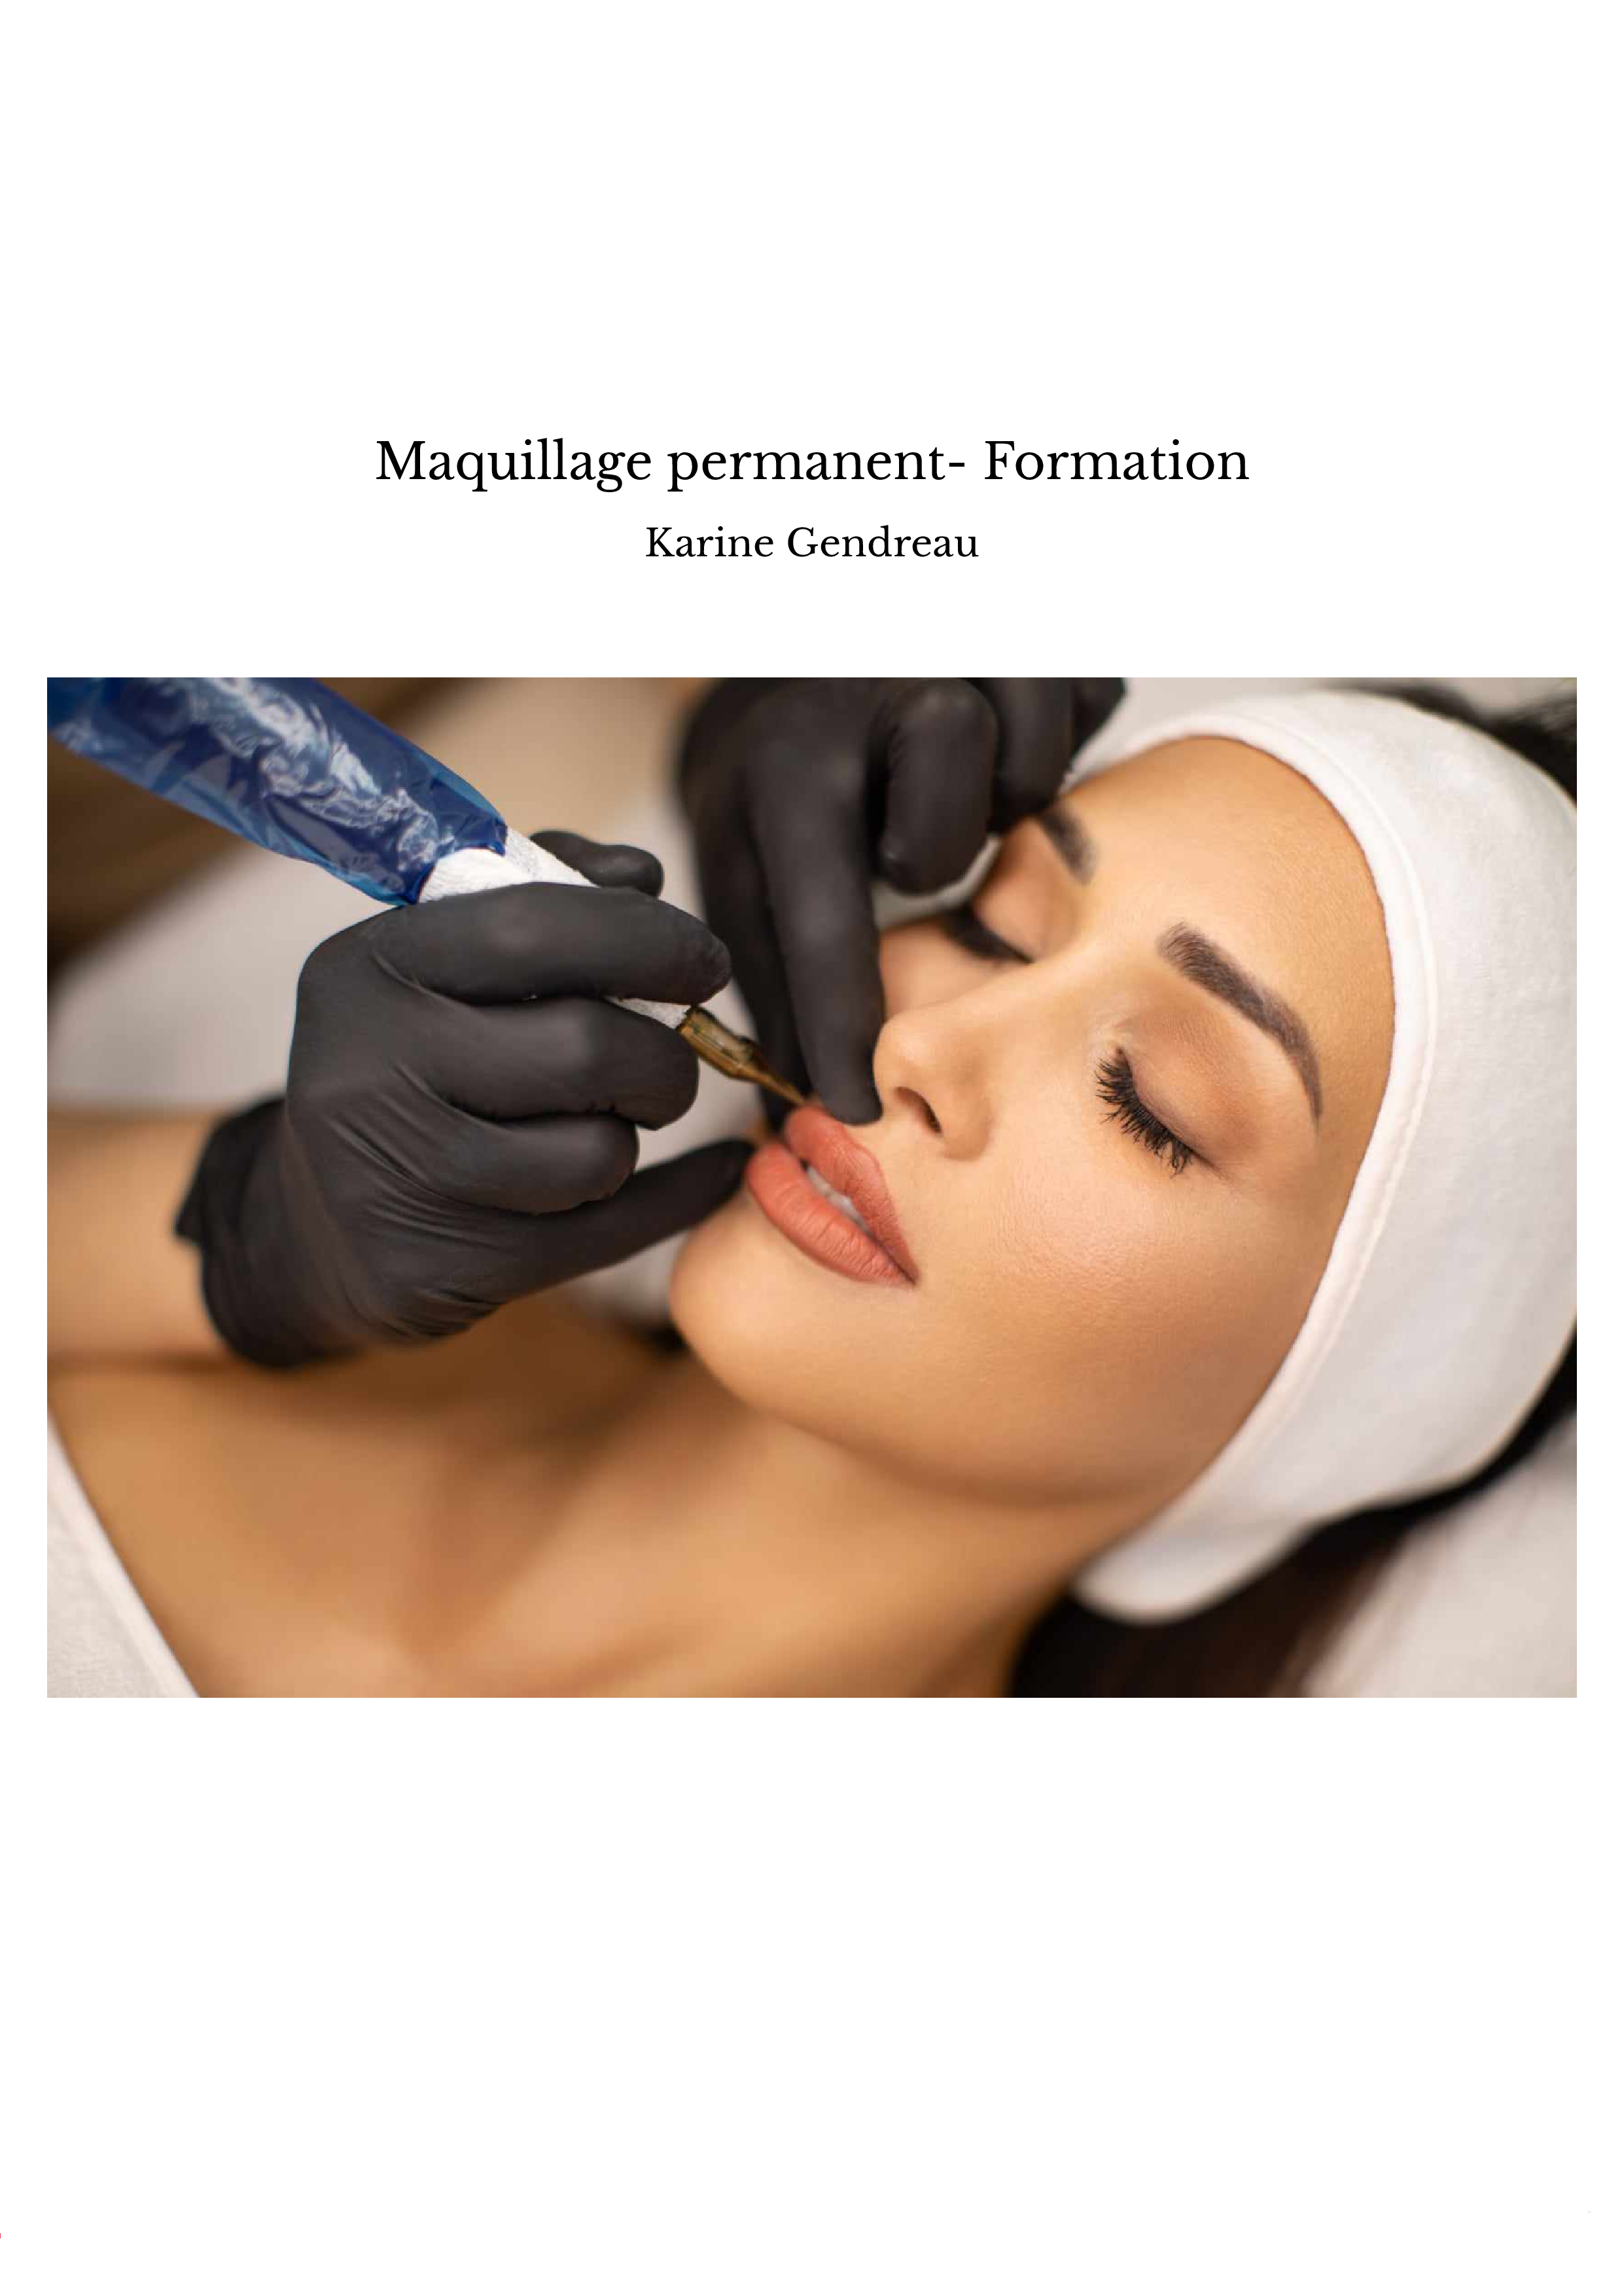 Maquillage permanent- Formation